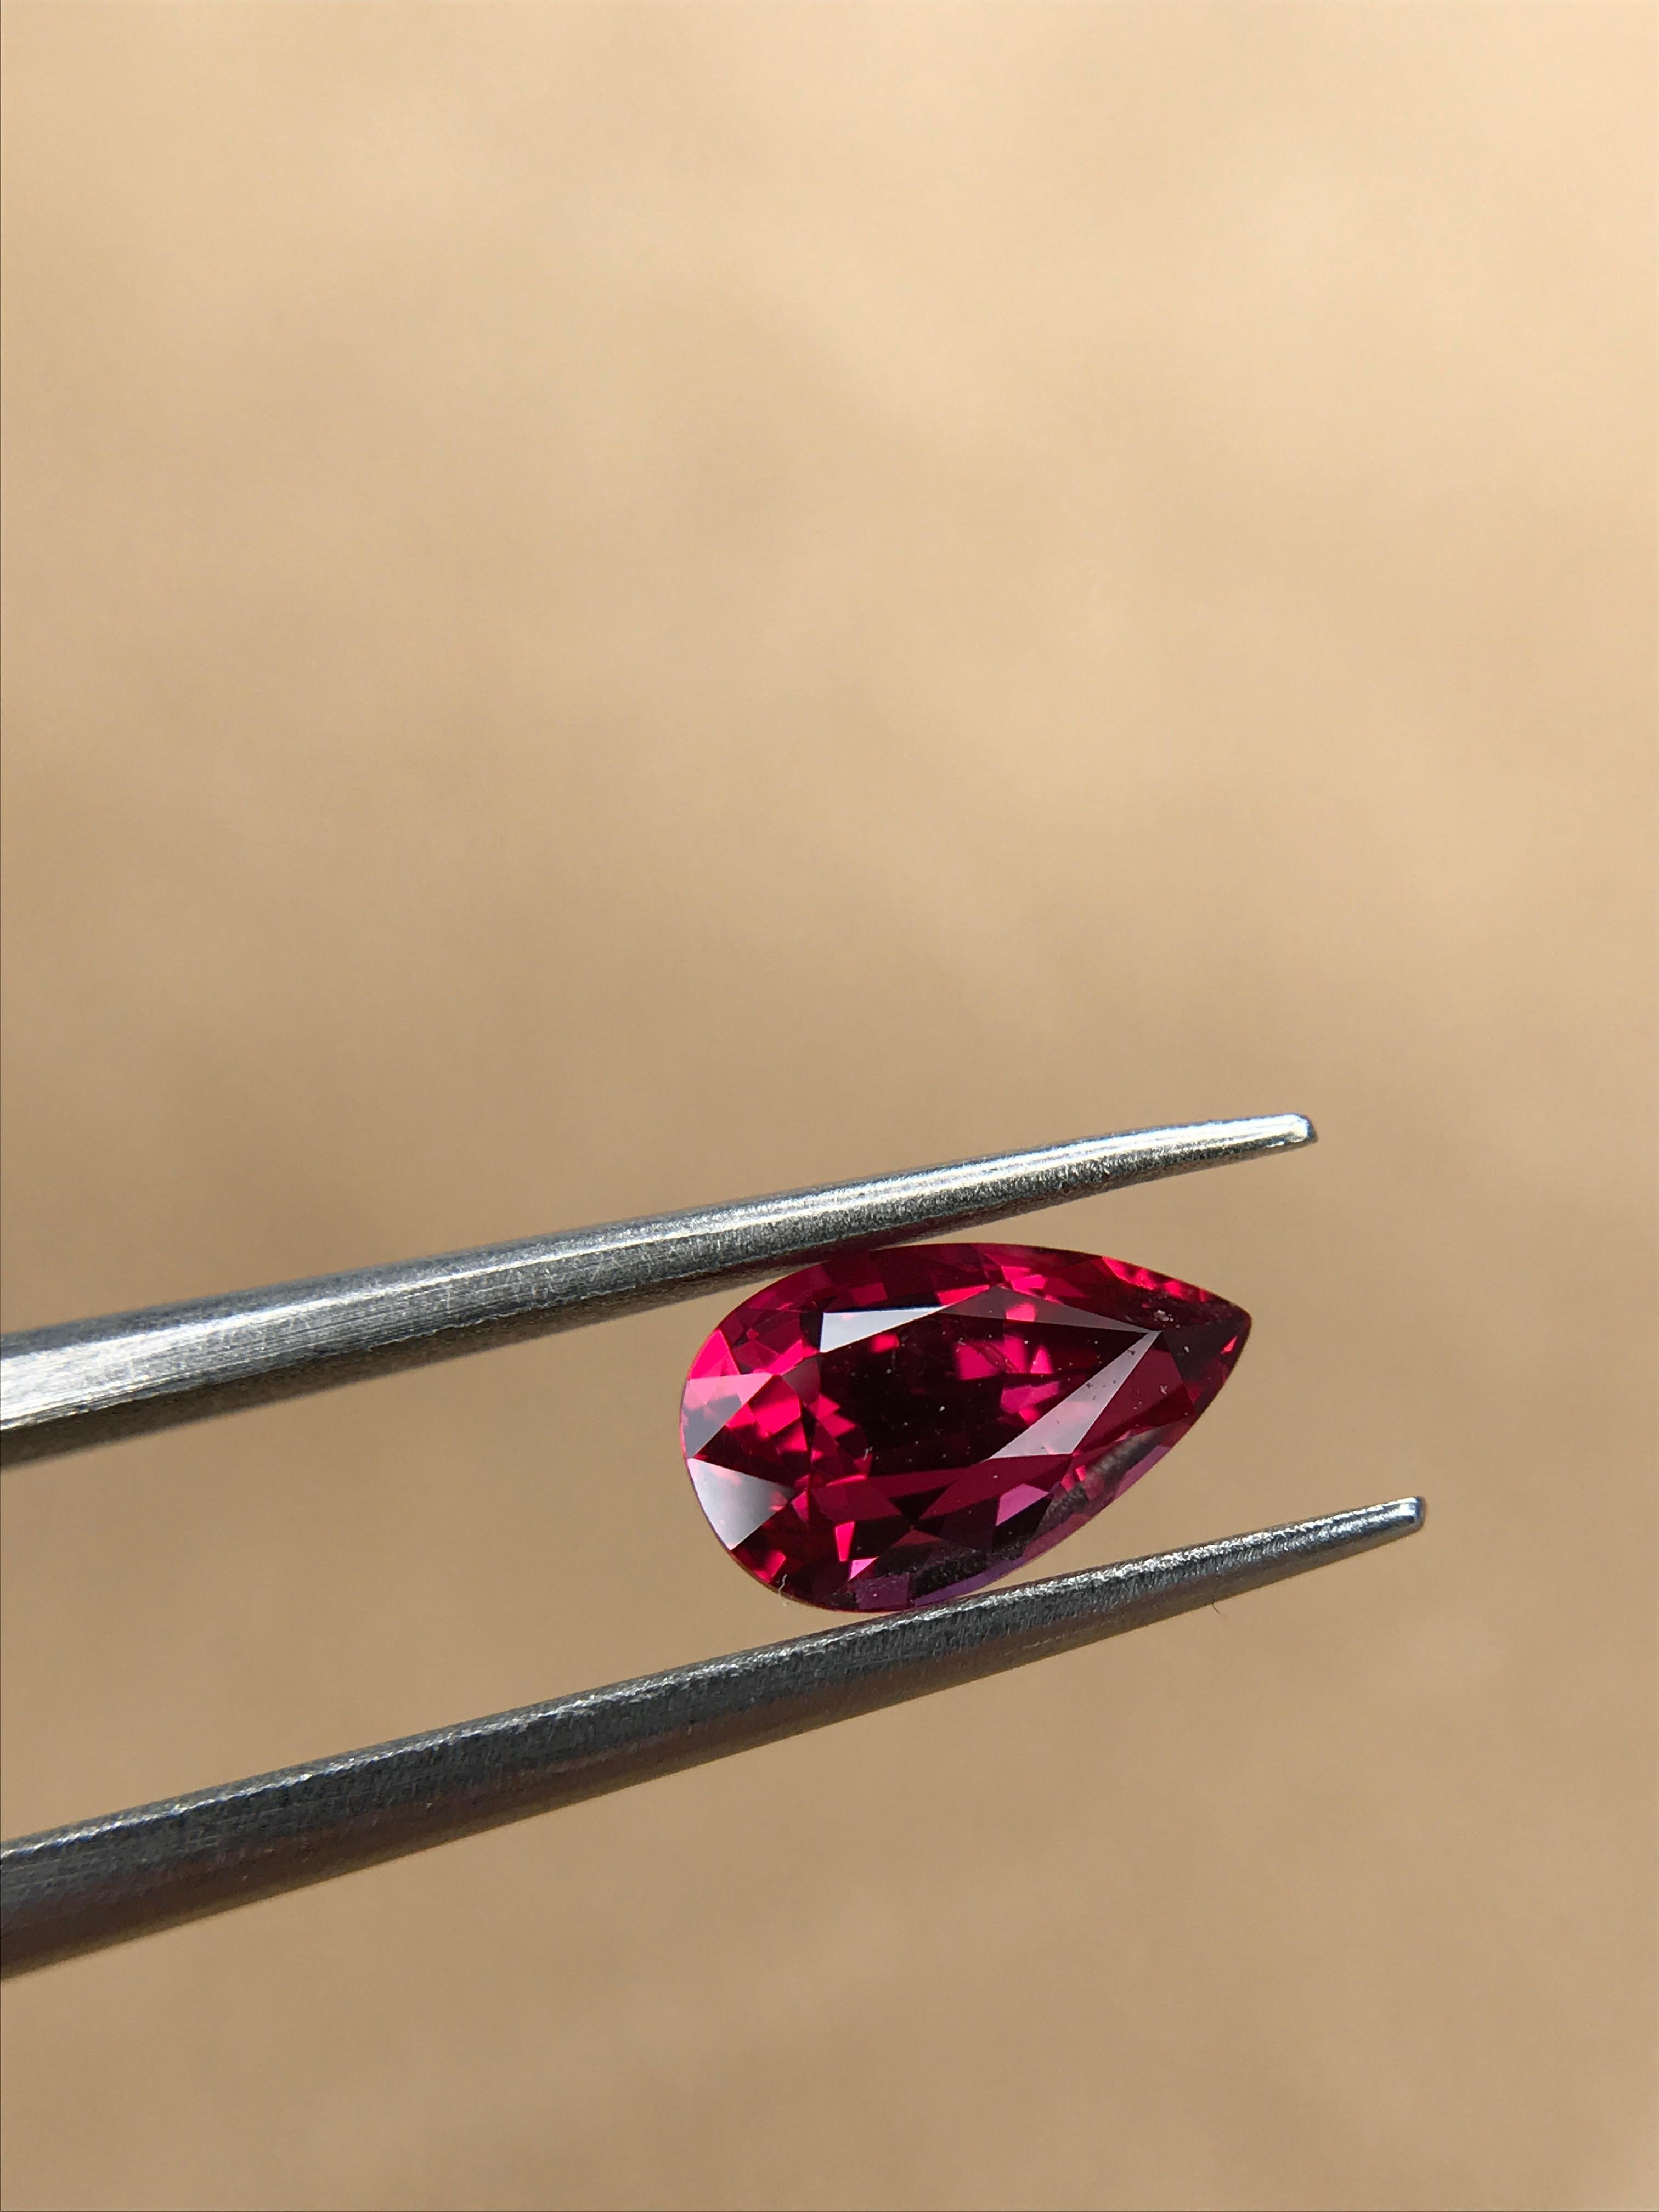 Contemporary 1.01 Carat Natural Pear-Shaped Ruby For Sale